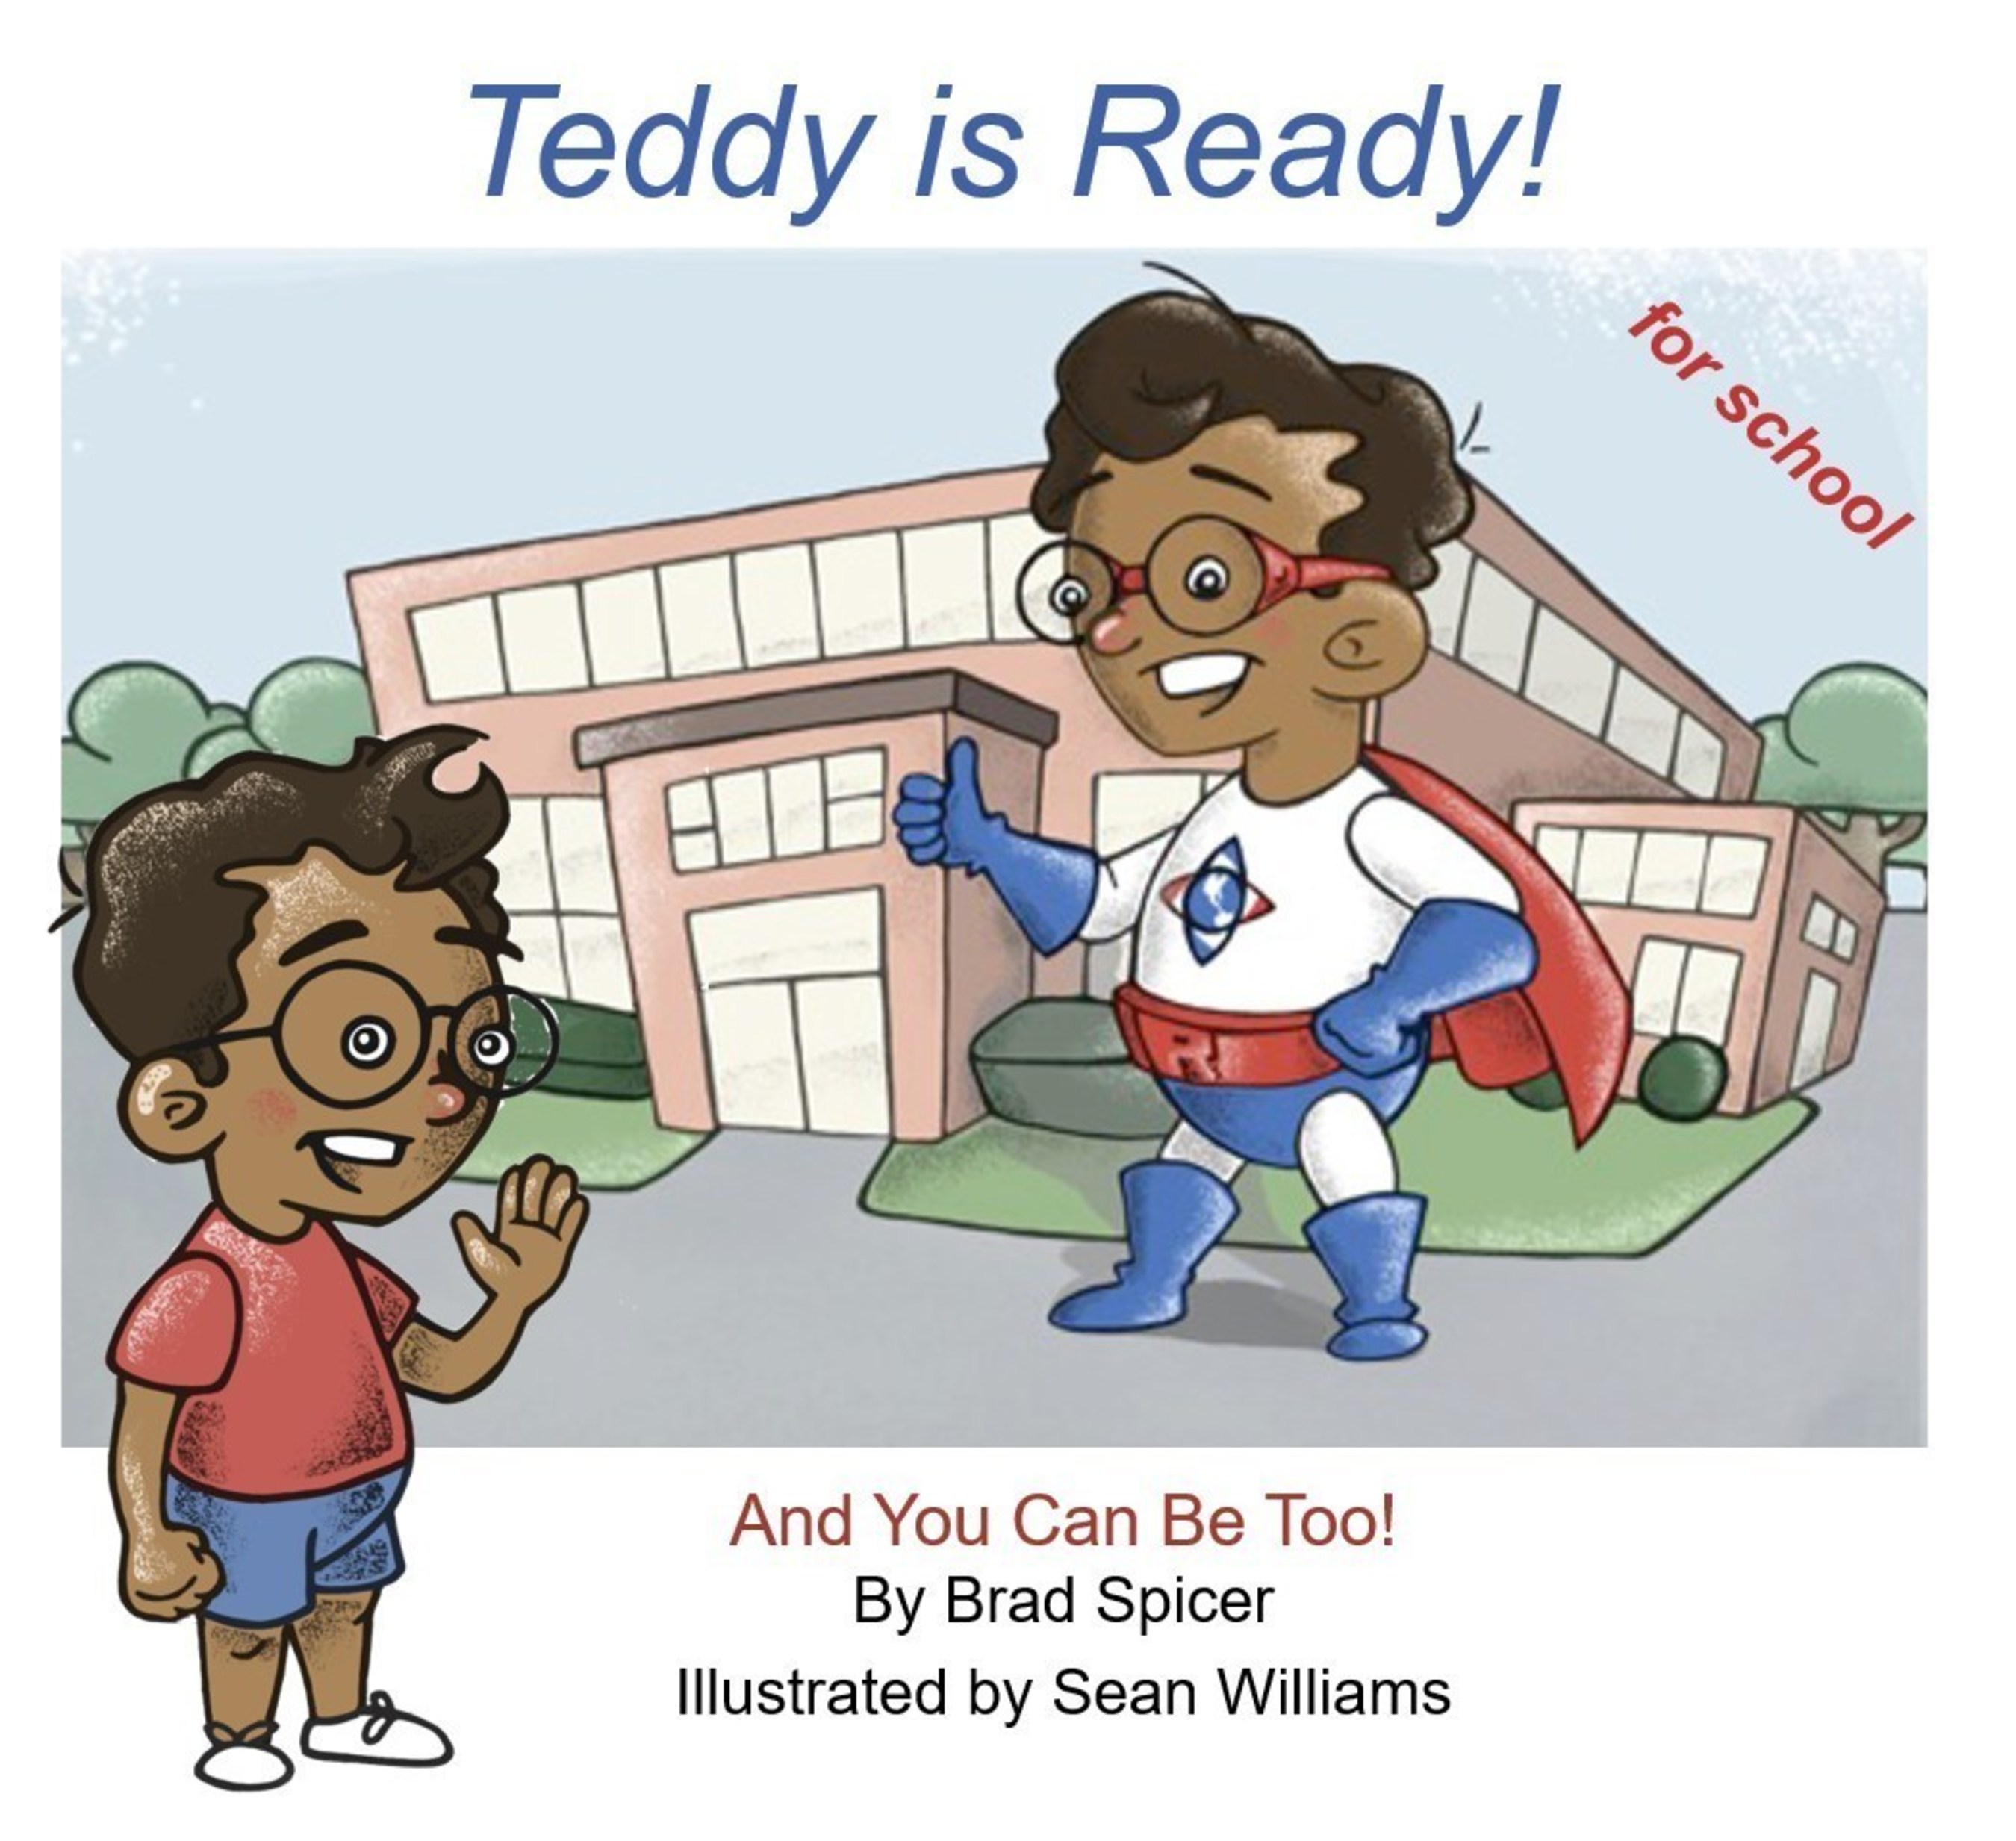 Teddy is Ready is a book to help parents and teachers prepare young people for school emergencies.